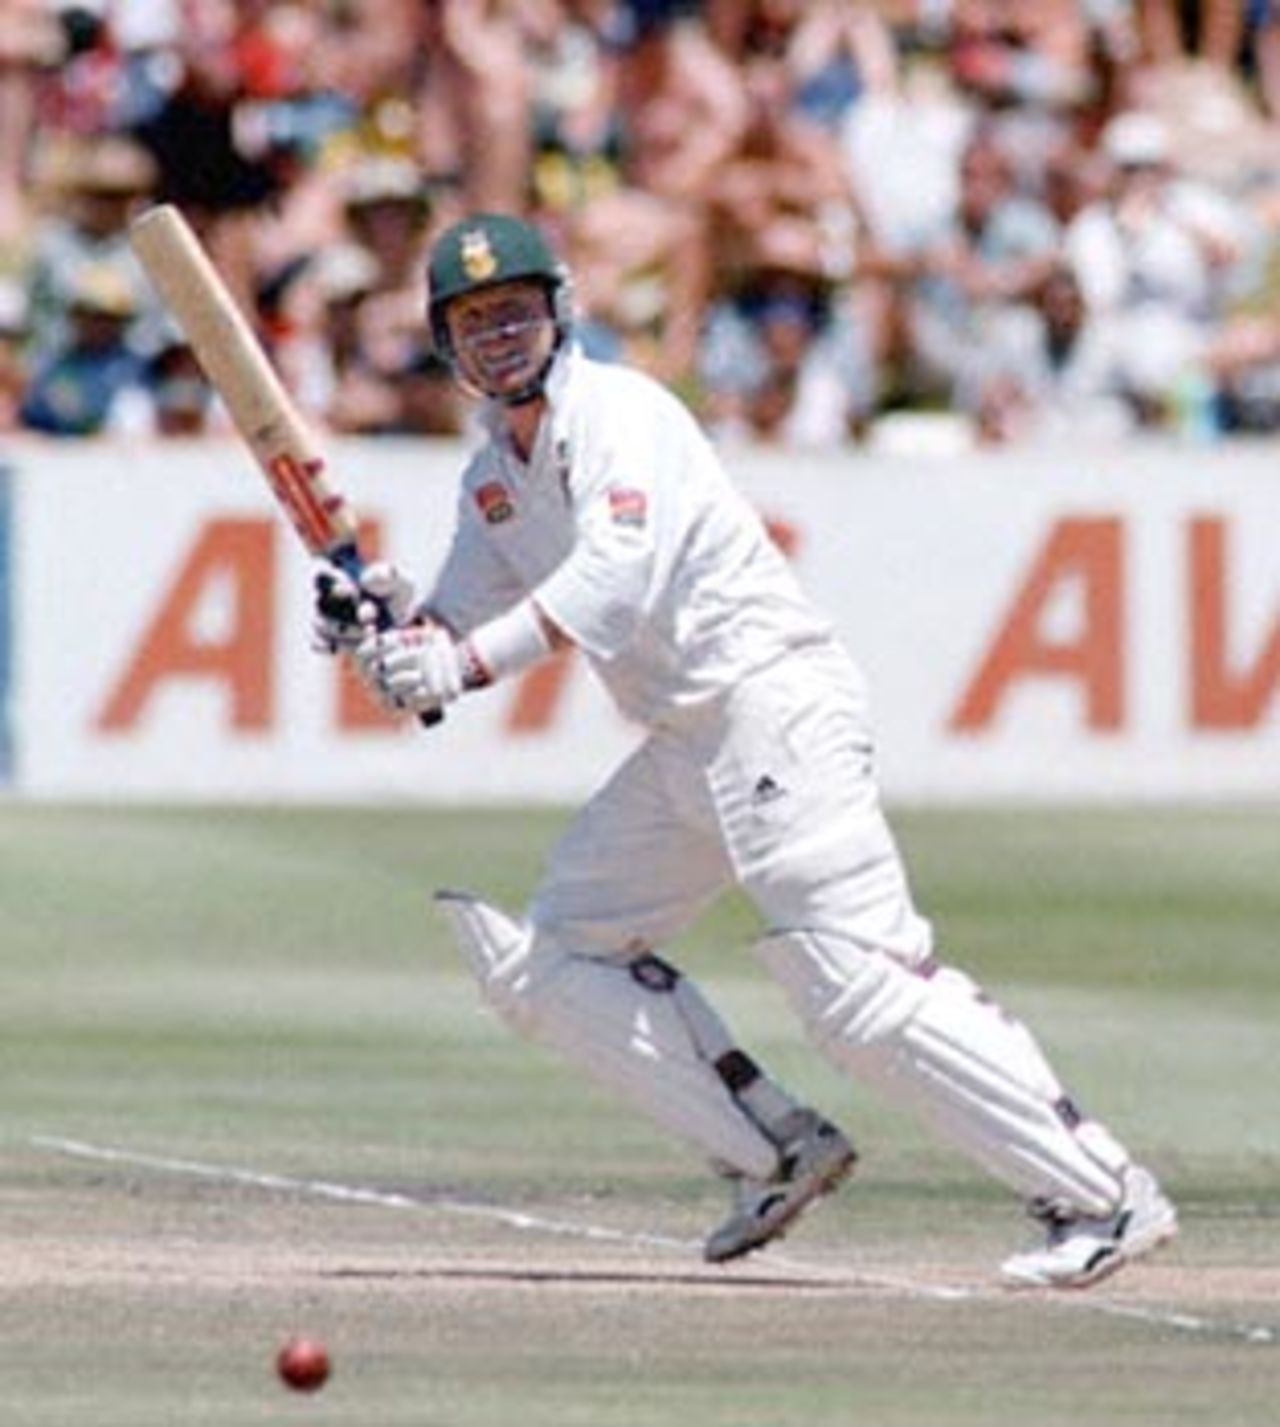 South African batsman Darryl Cullinan defends the wicket 03 January 2001 on the second day of the five-day cricket test between South Africa and Sri Lanka played at Newlands cricket grounds in Cape Town.